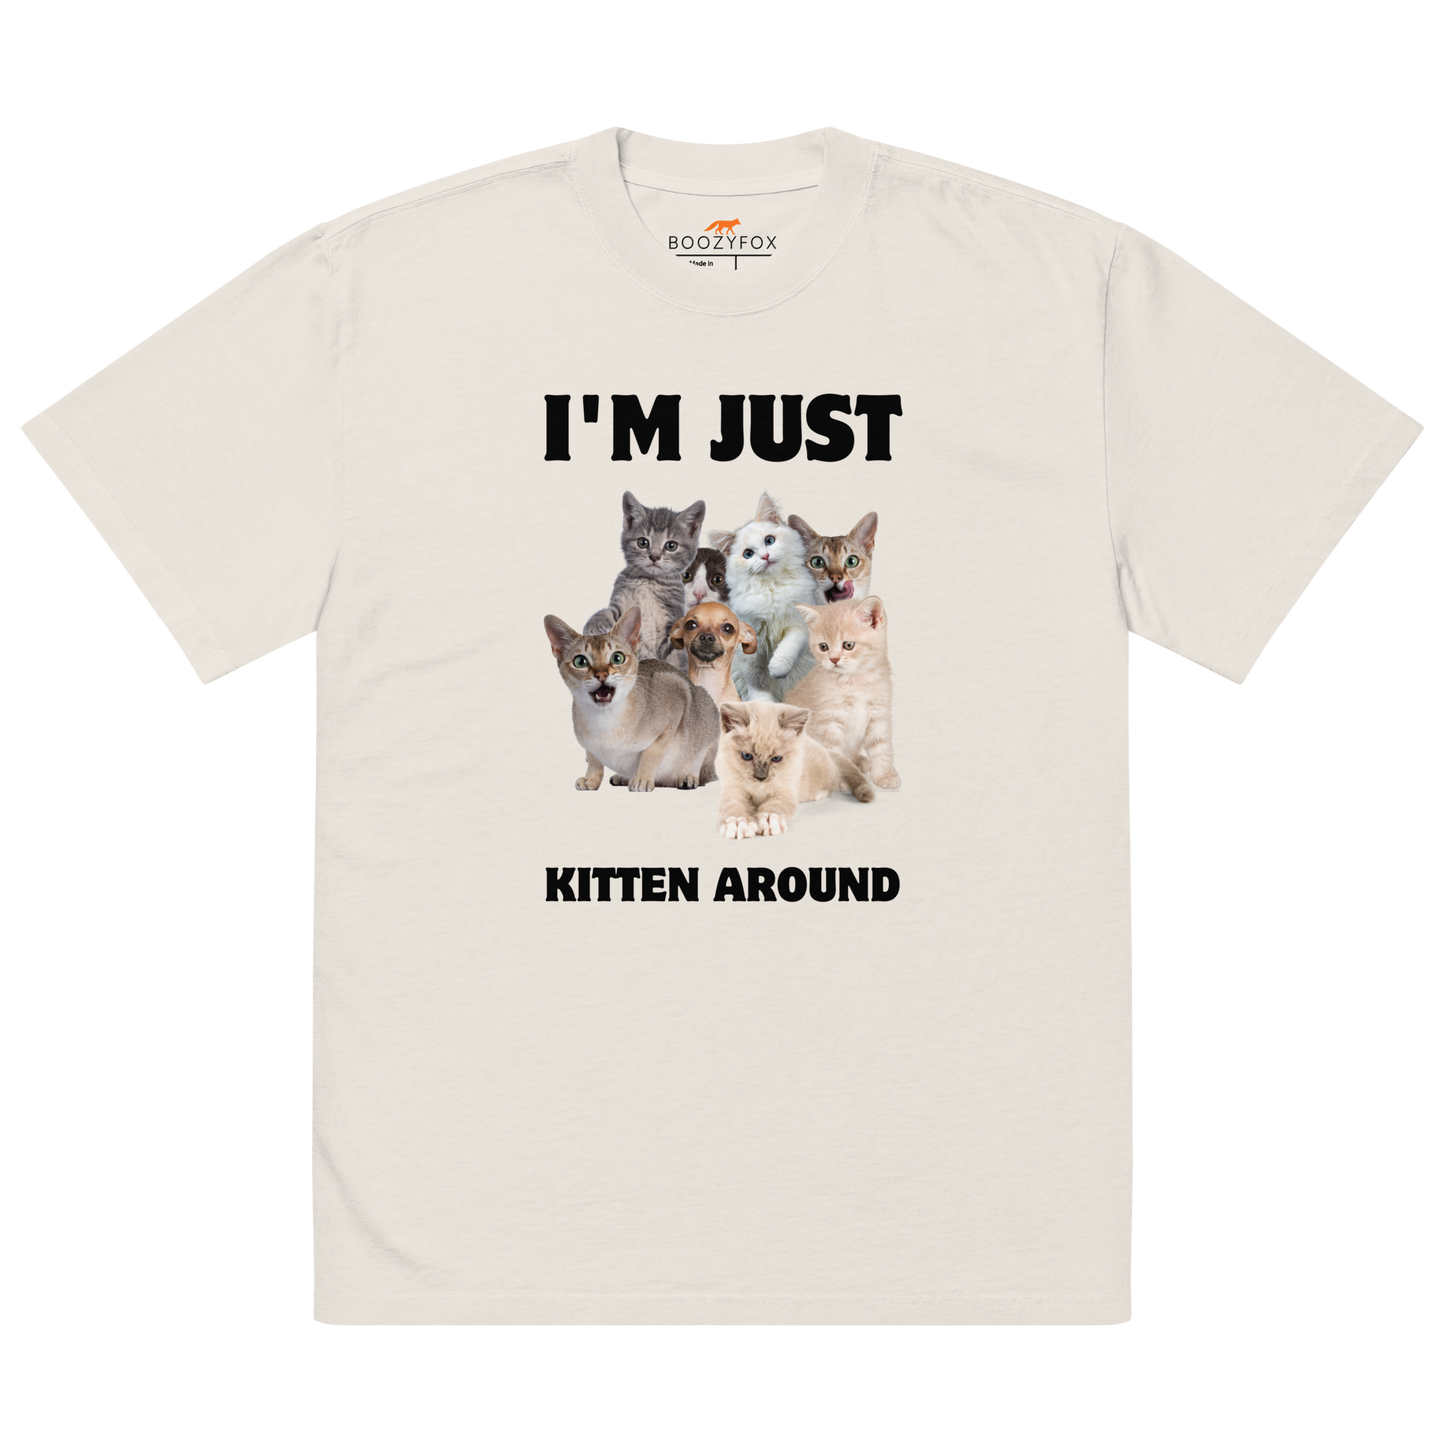 Faded Bone Cat Oversized T-Shirt featuring an I'm Just Kitten Around graphic on the chest - Funny Graphic Cat Oversized Tees - Boozy Fox